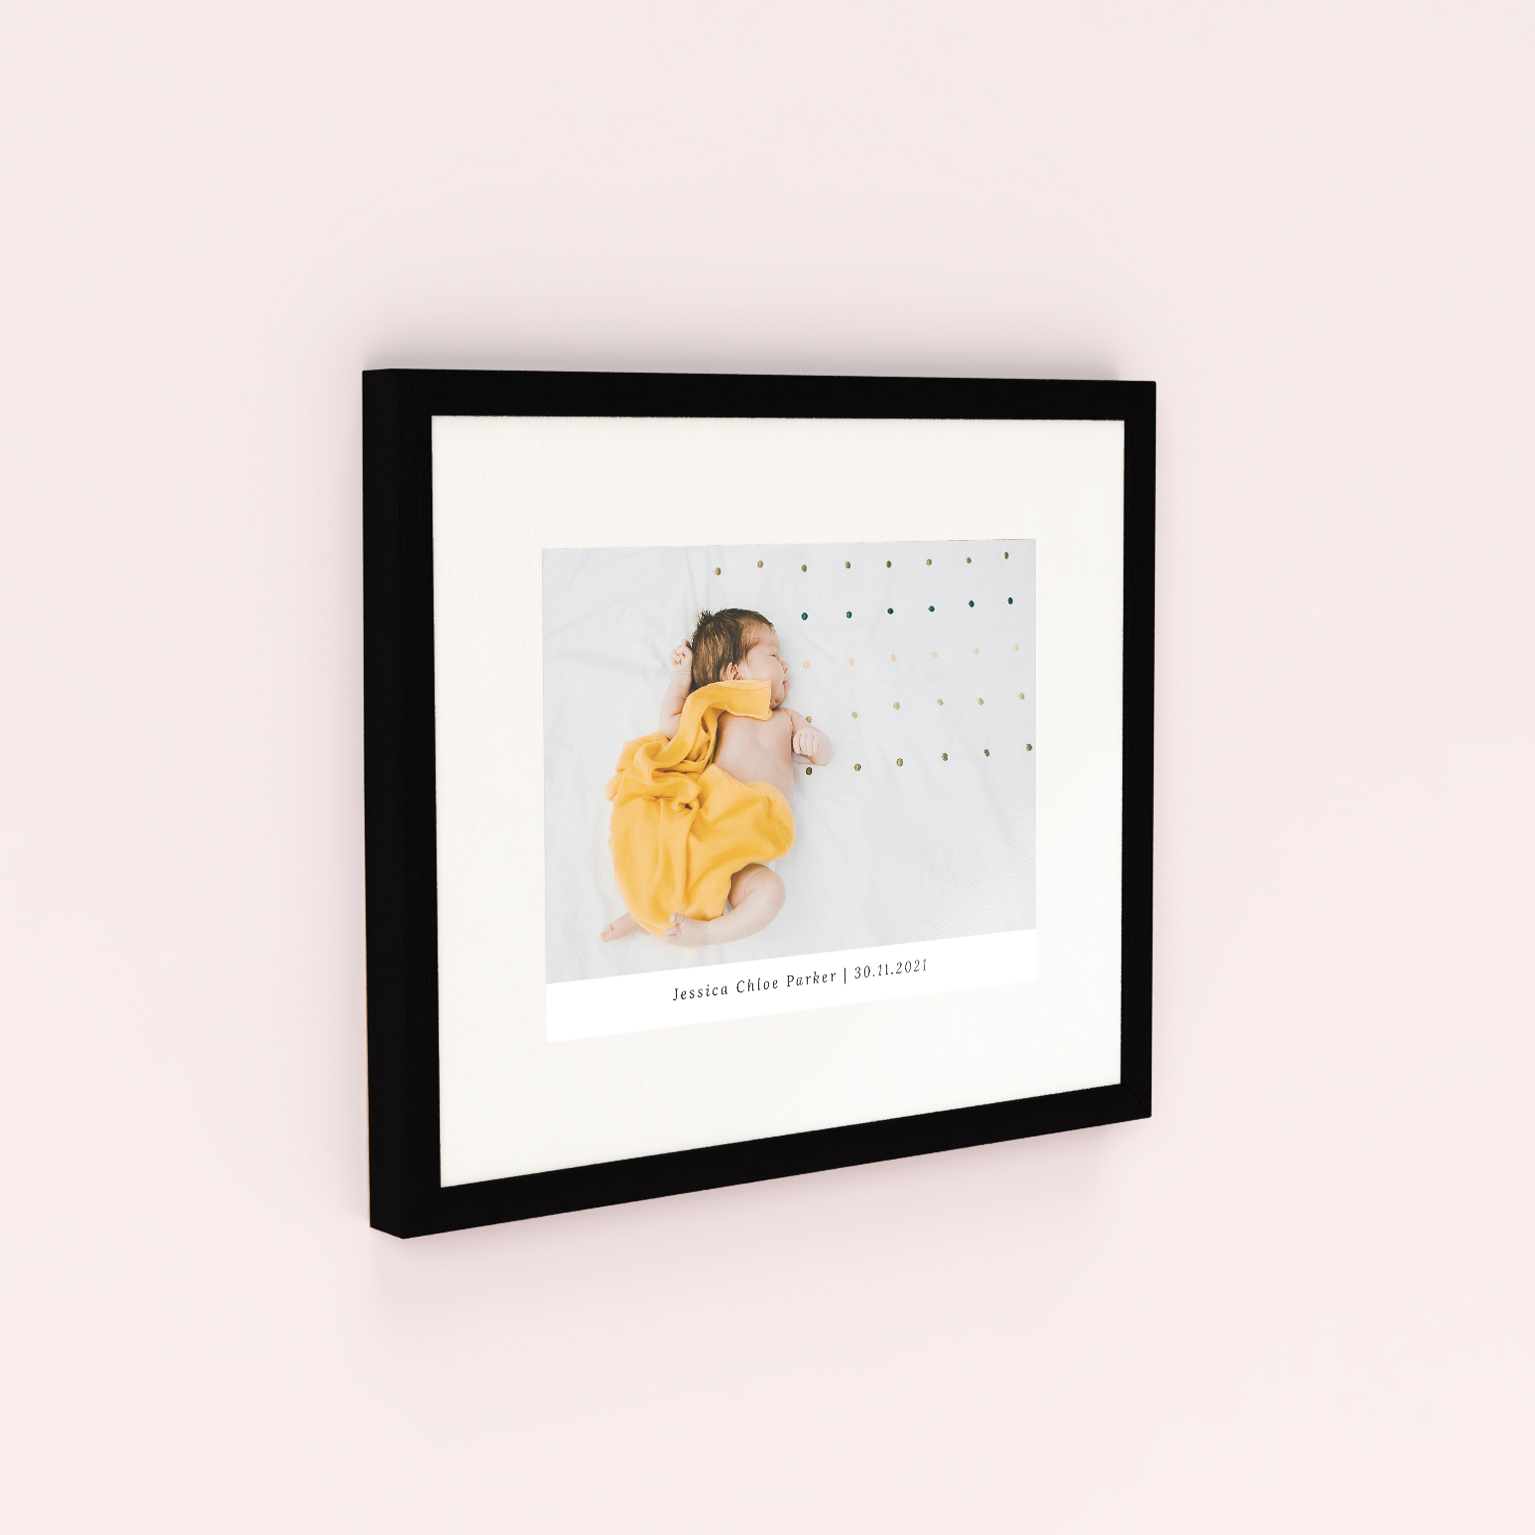 Curved Corners Framed Photo Print - Transform your photos into modern masterpieces with elegance.